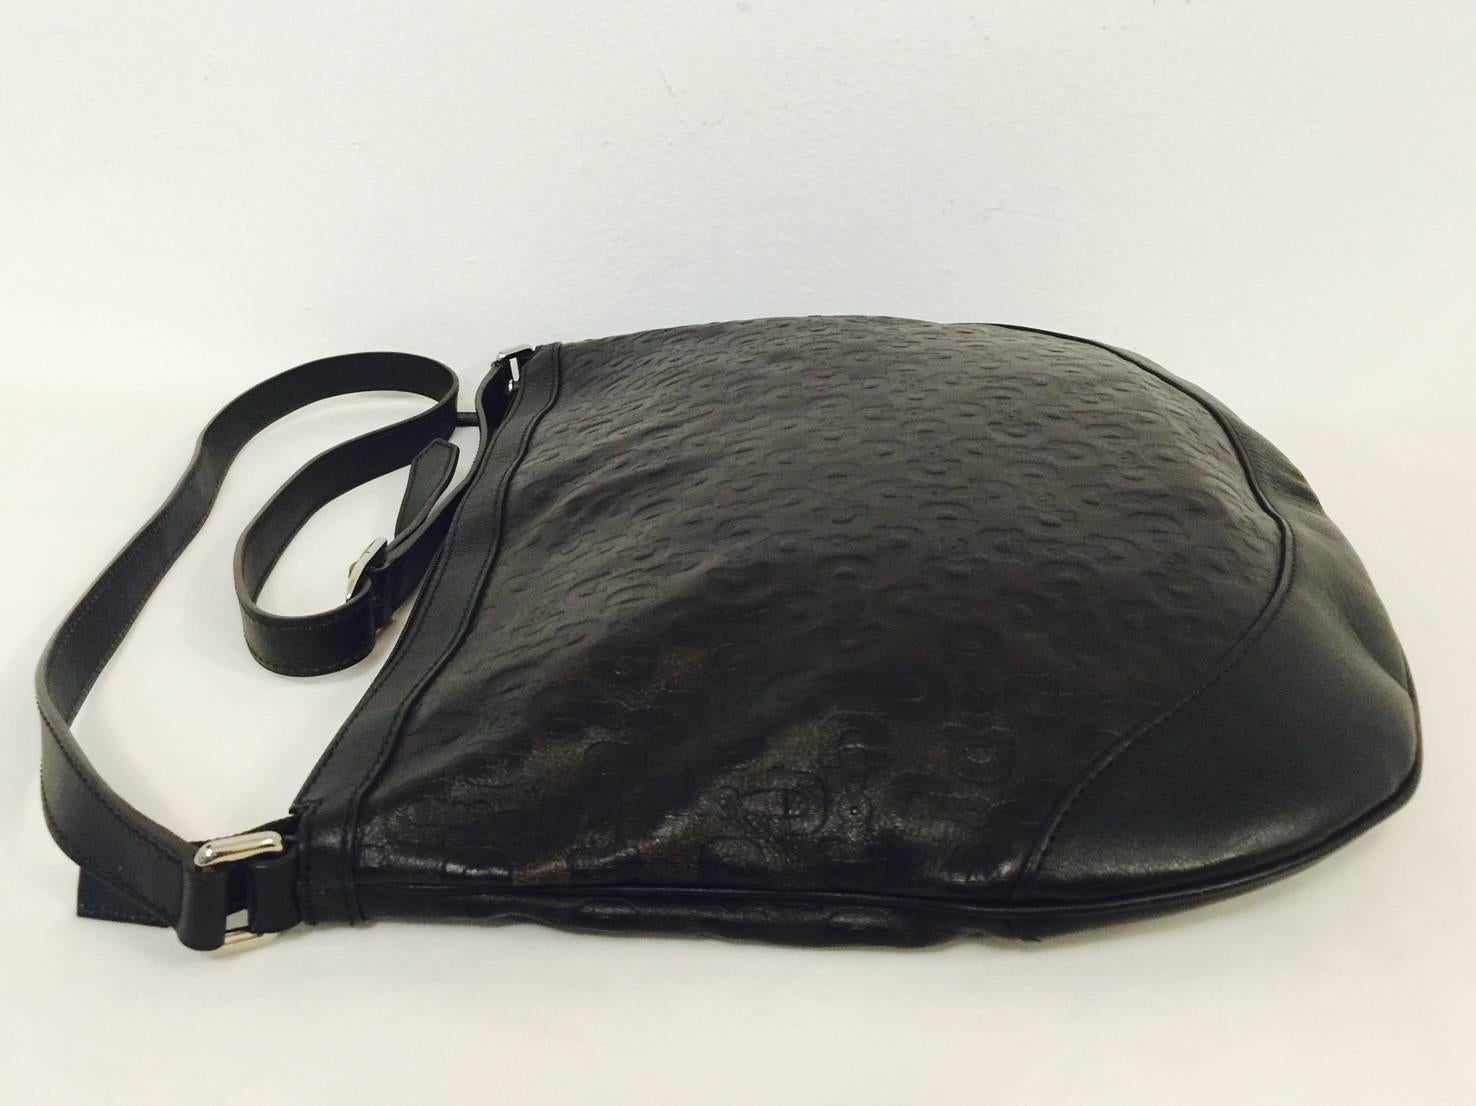 Gucci Guccissima Large Horsebit Chain Hobo is a must for any connoisseur of Italian crafted handbags!  Features signature stamped leather body and smooth leather trim.  Top zippered closure reveals deep chocolate fabric lining, one zippered